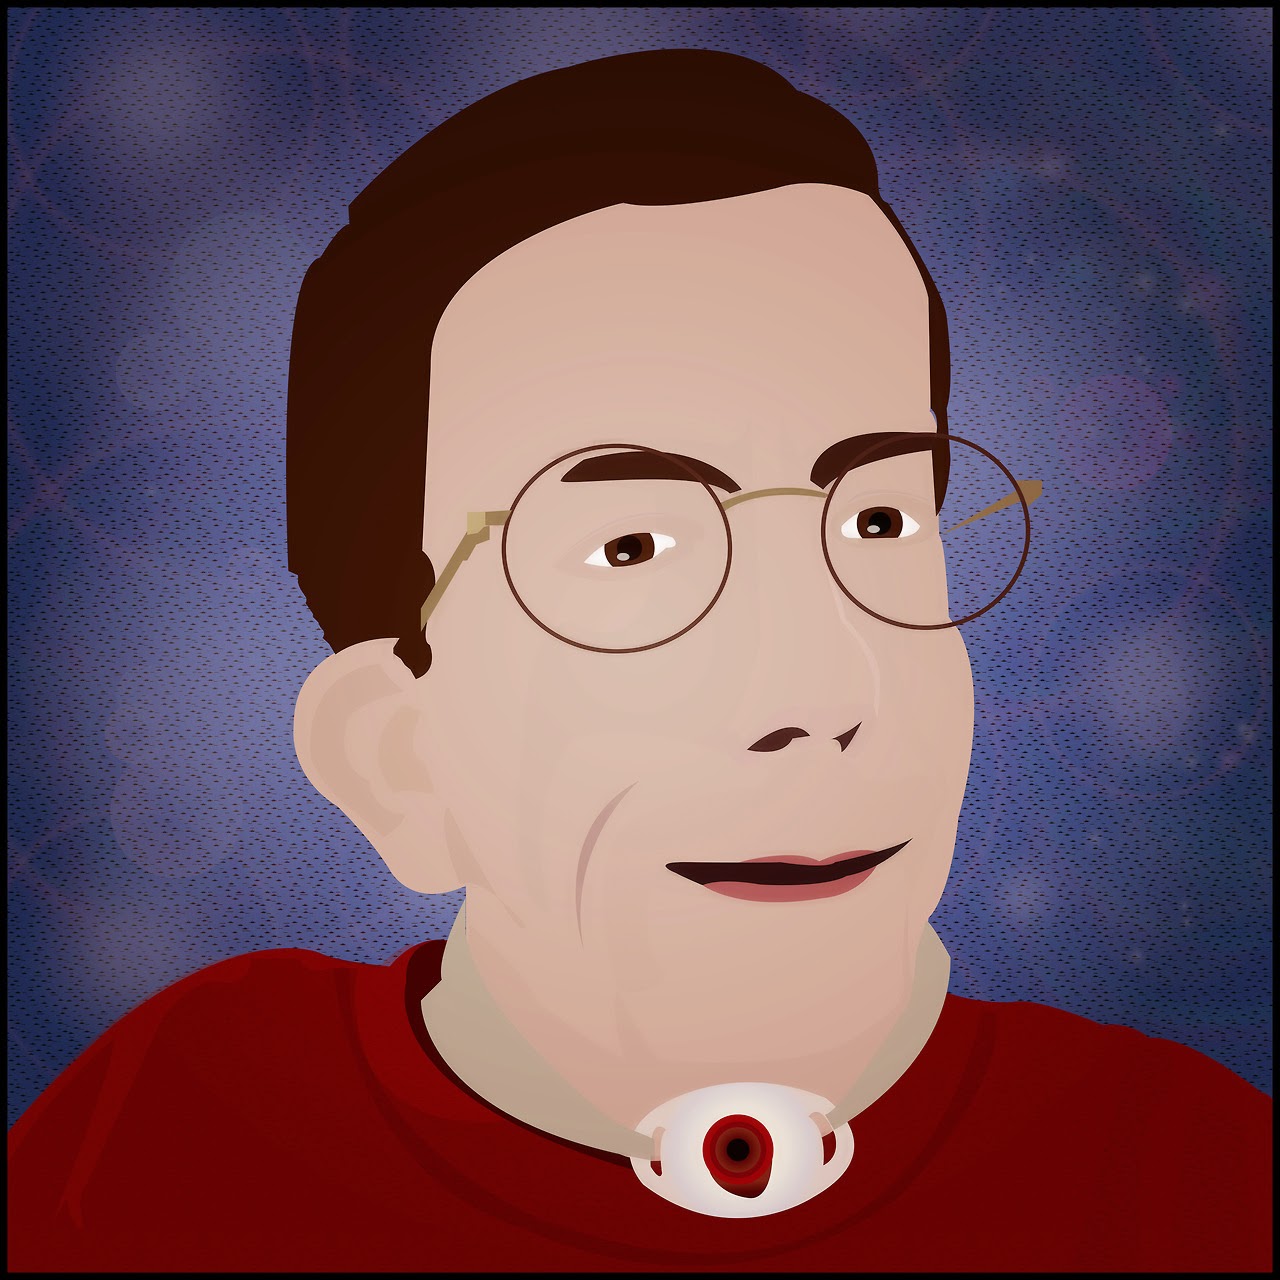 Painted color portrait of Andrew Pulrang, white man with glasses and brown hair, with a tracheostomy, and wearing a red shirt